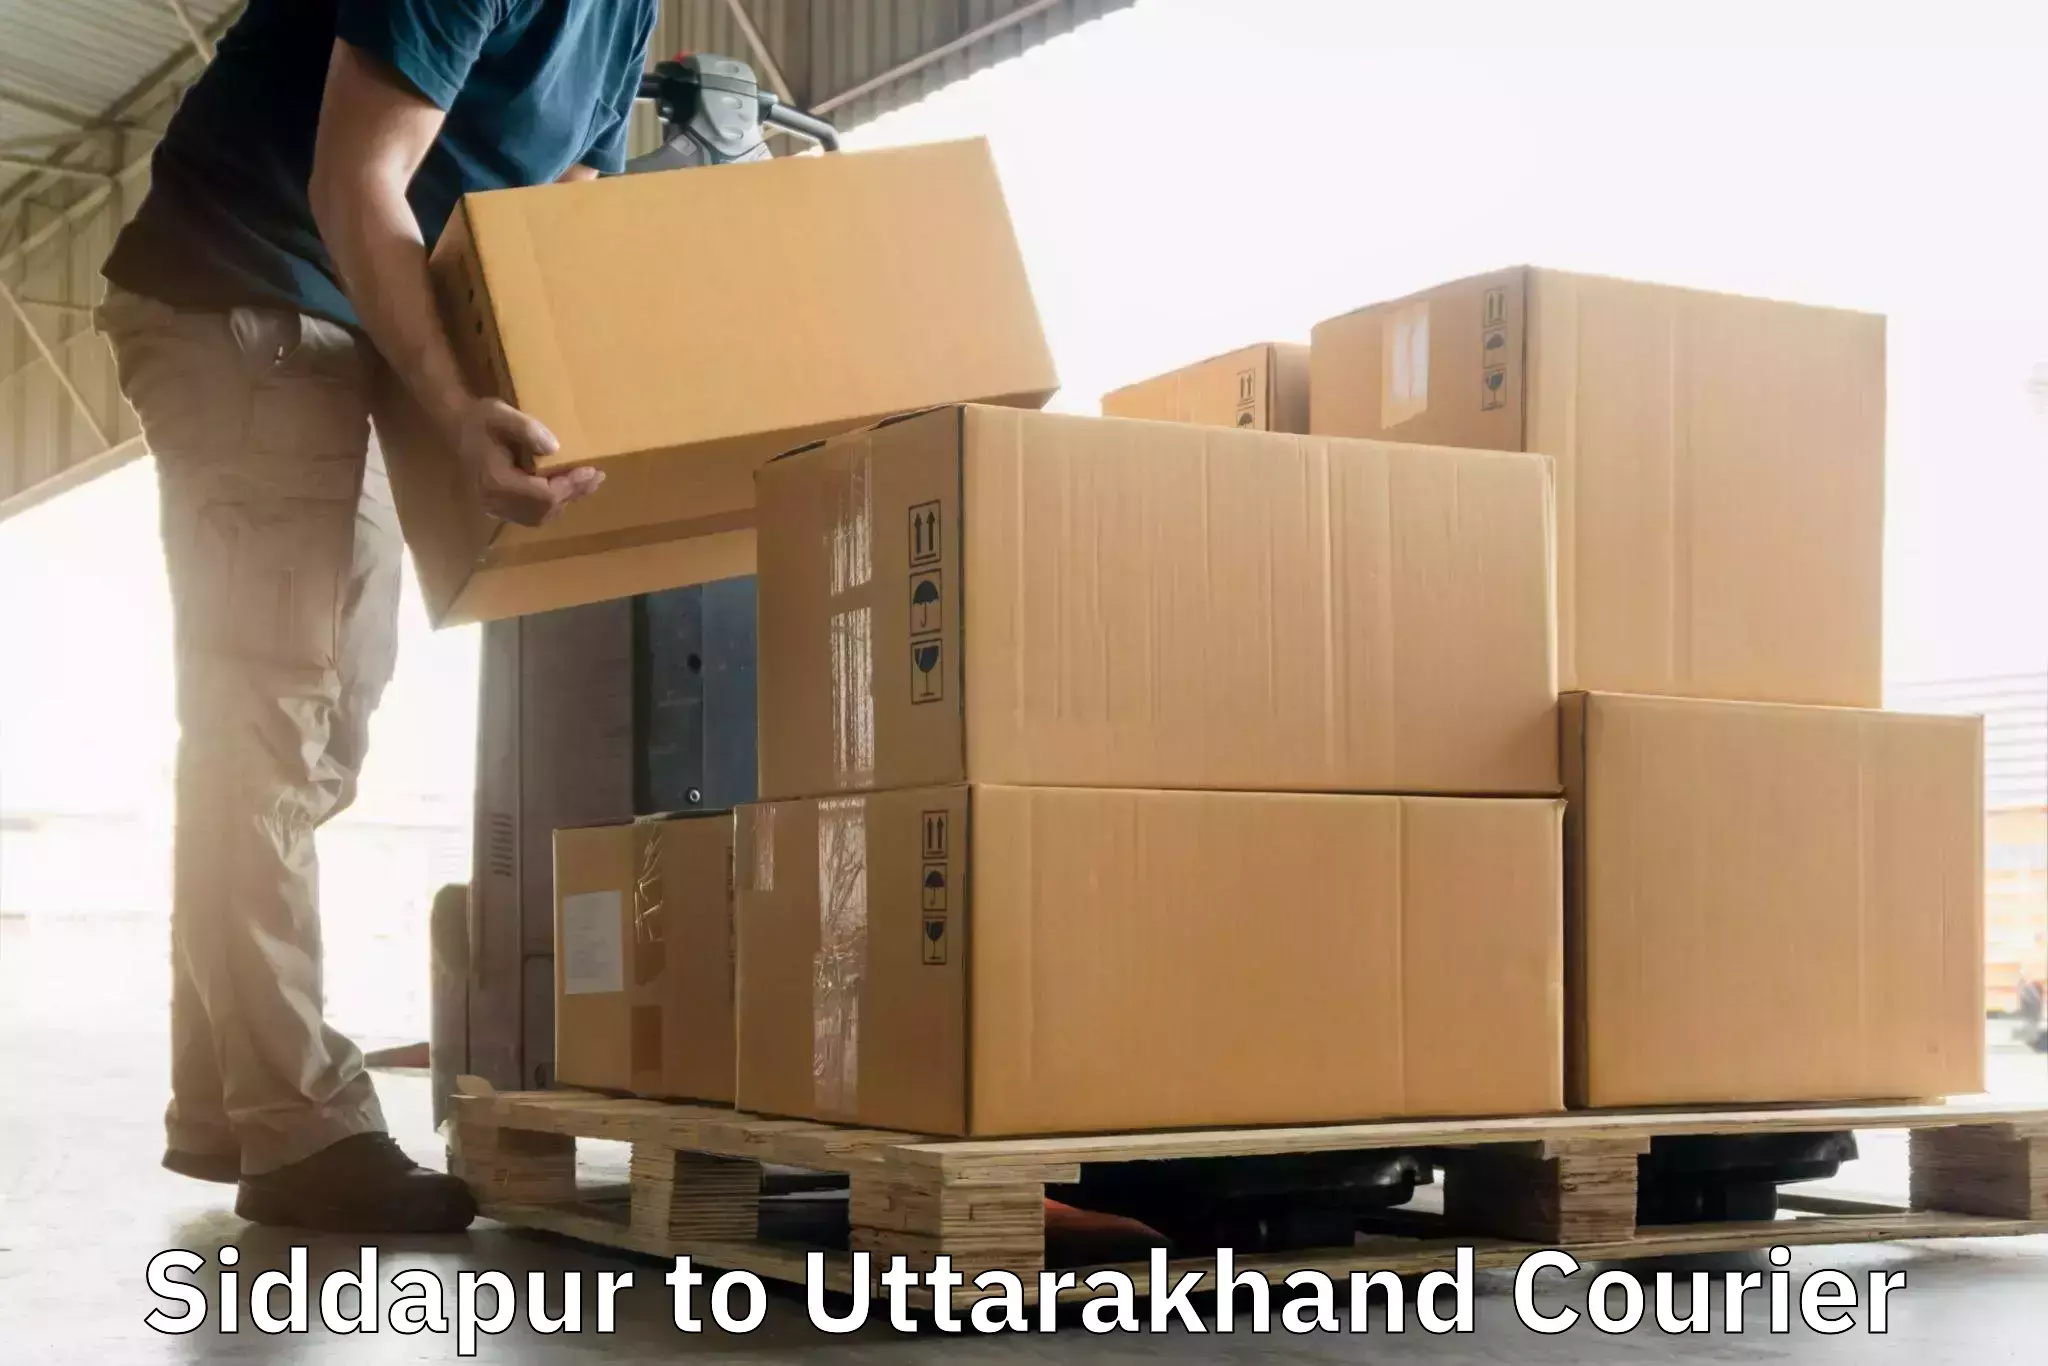 Local courier options Siddapur to Pauri Garhwal